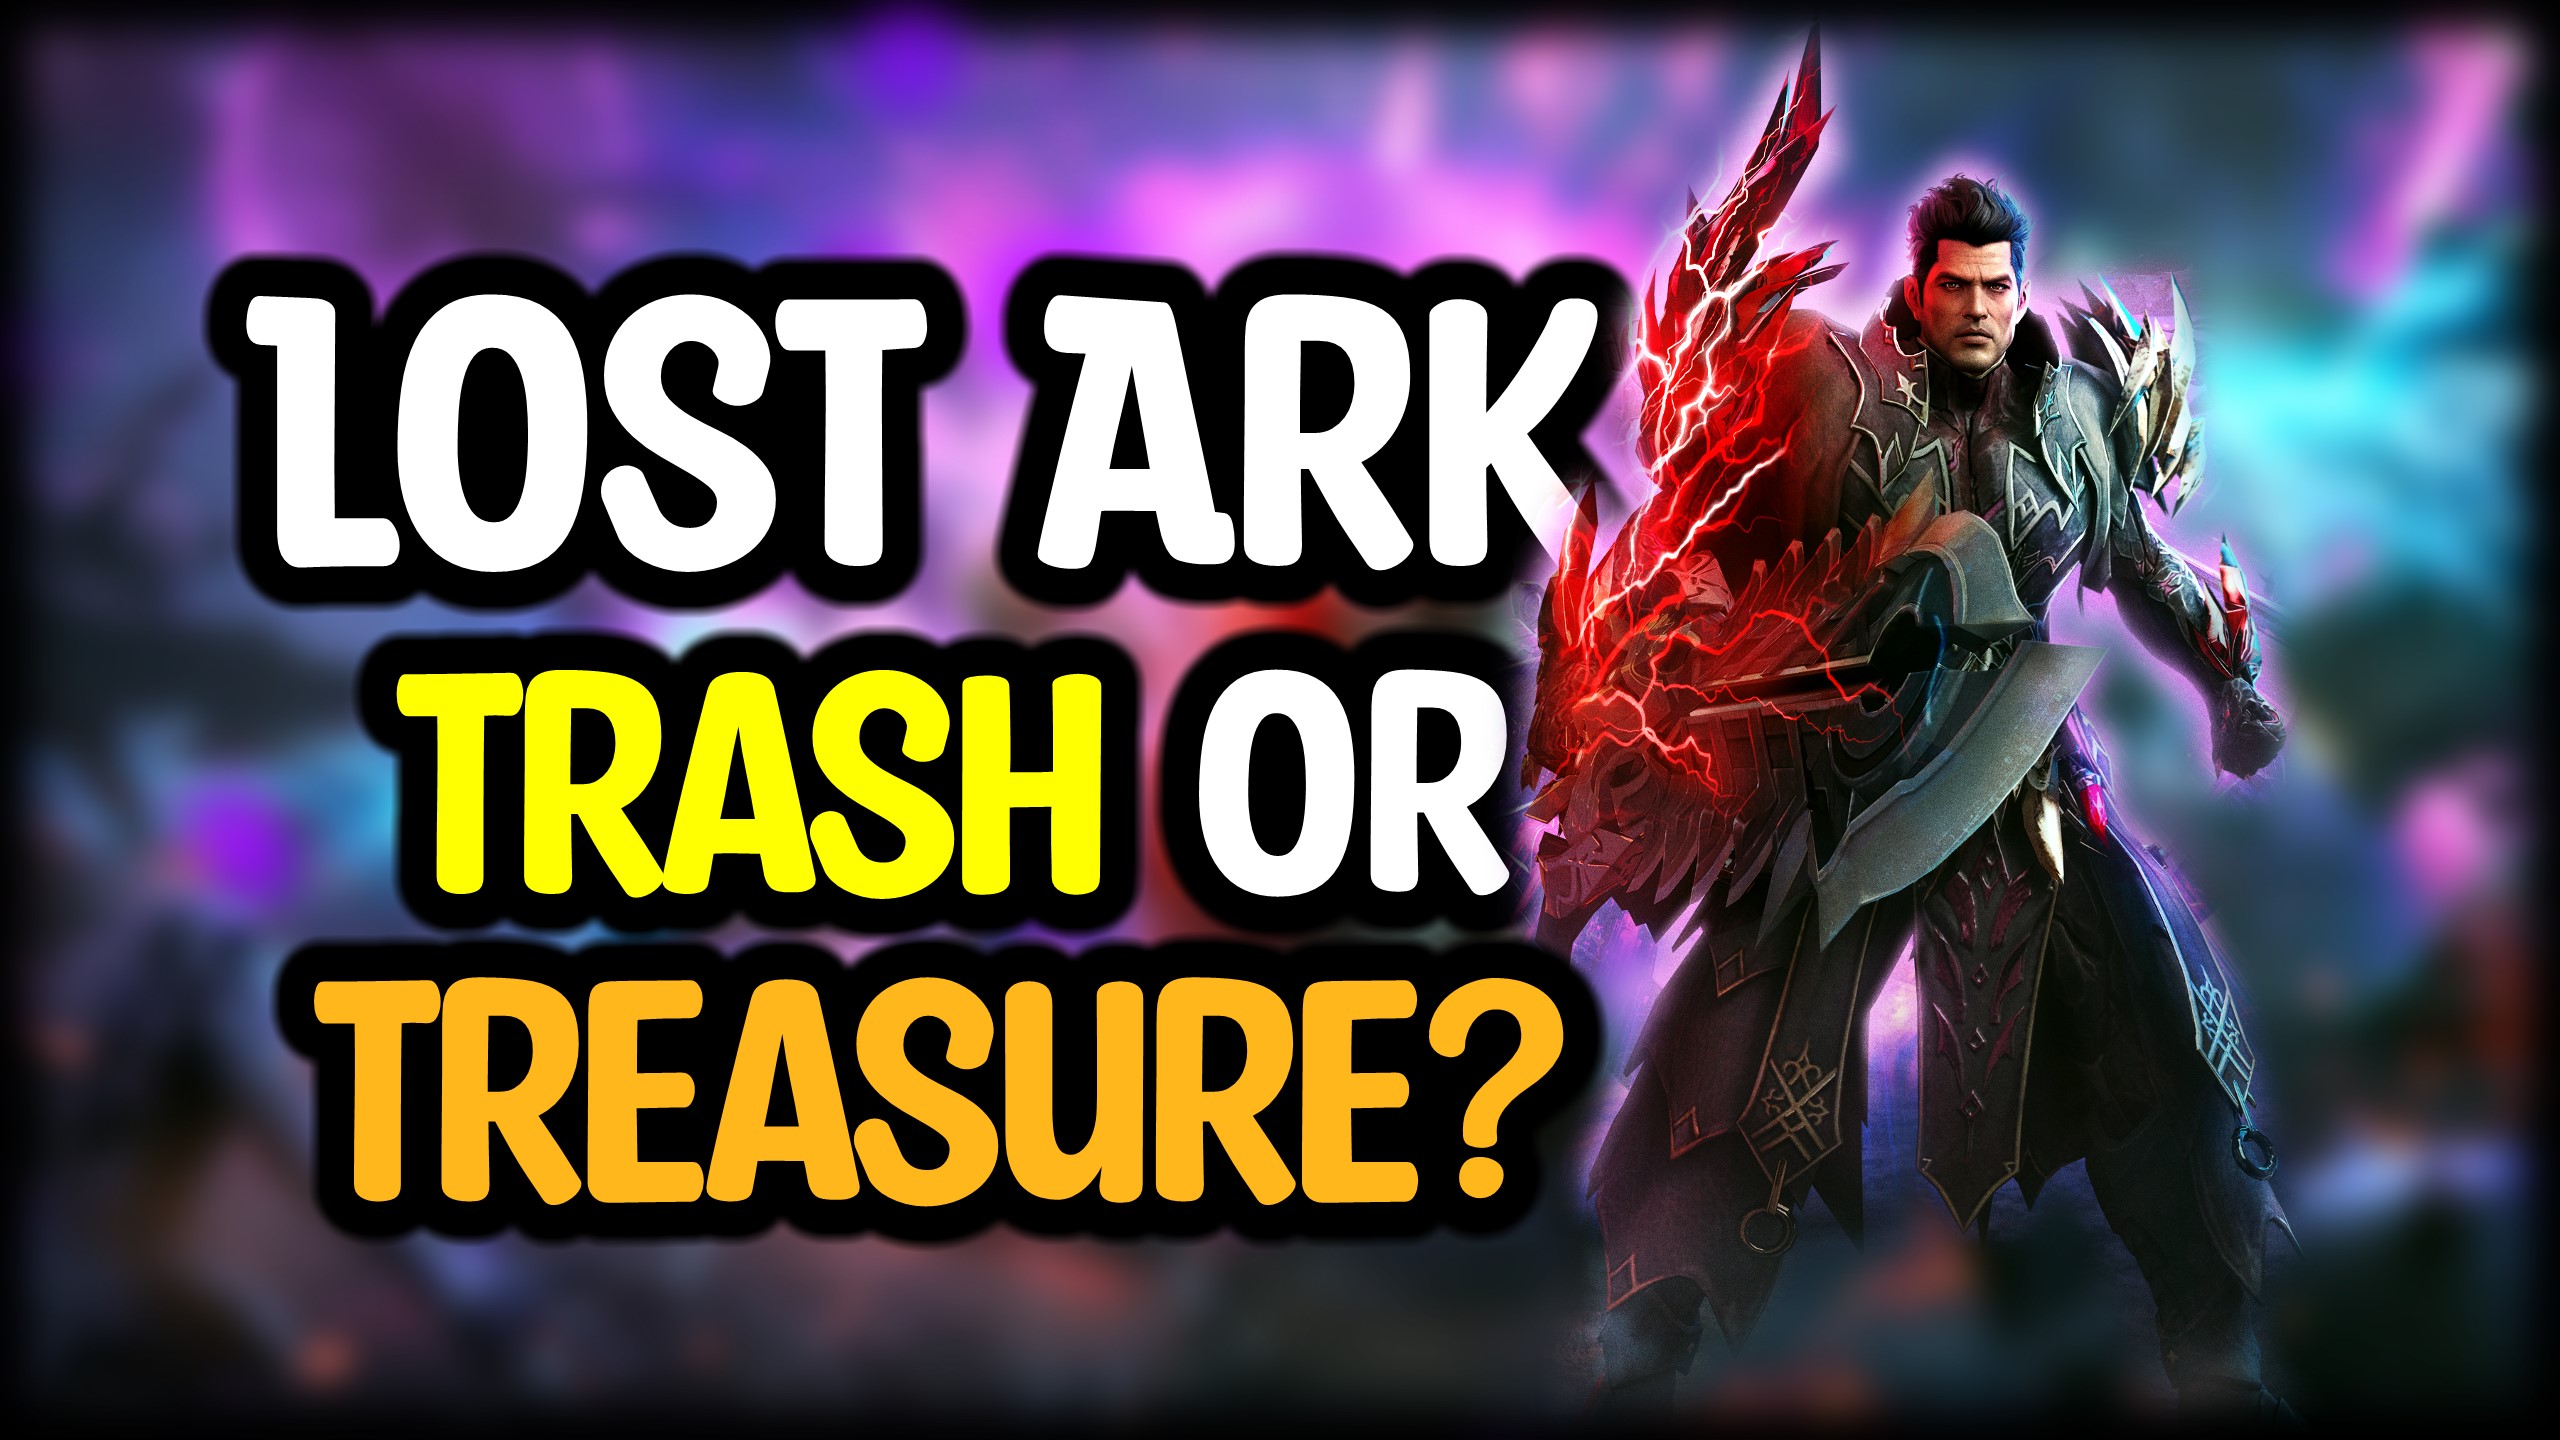 Lost Ark review